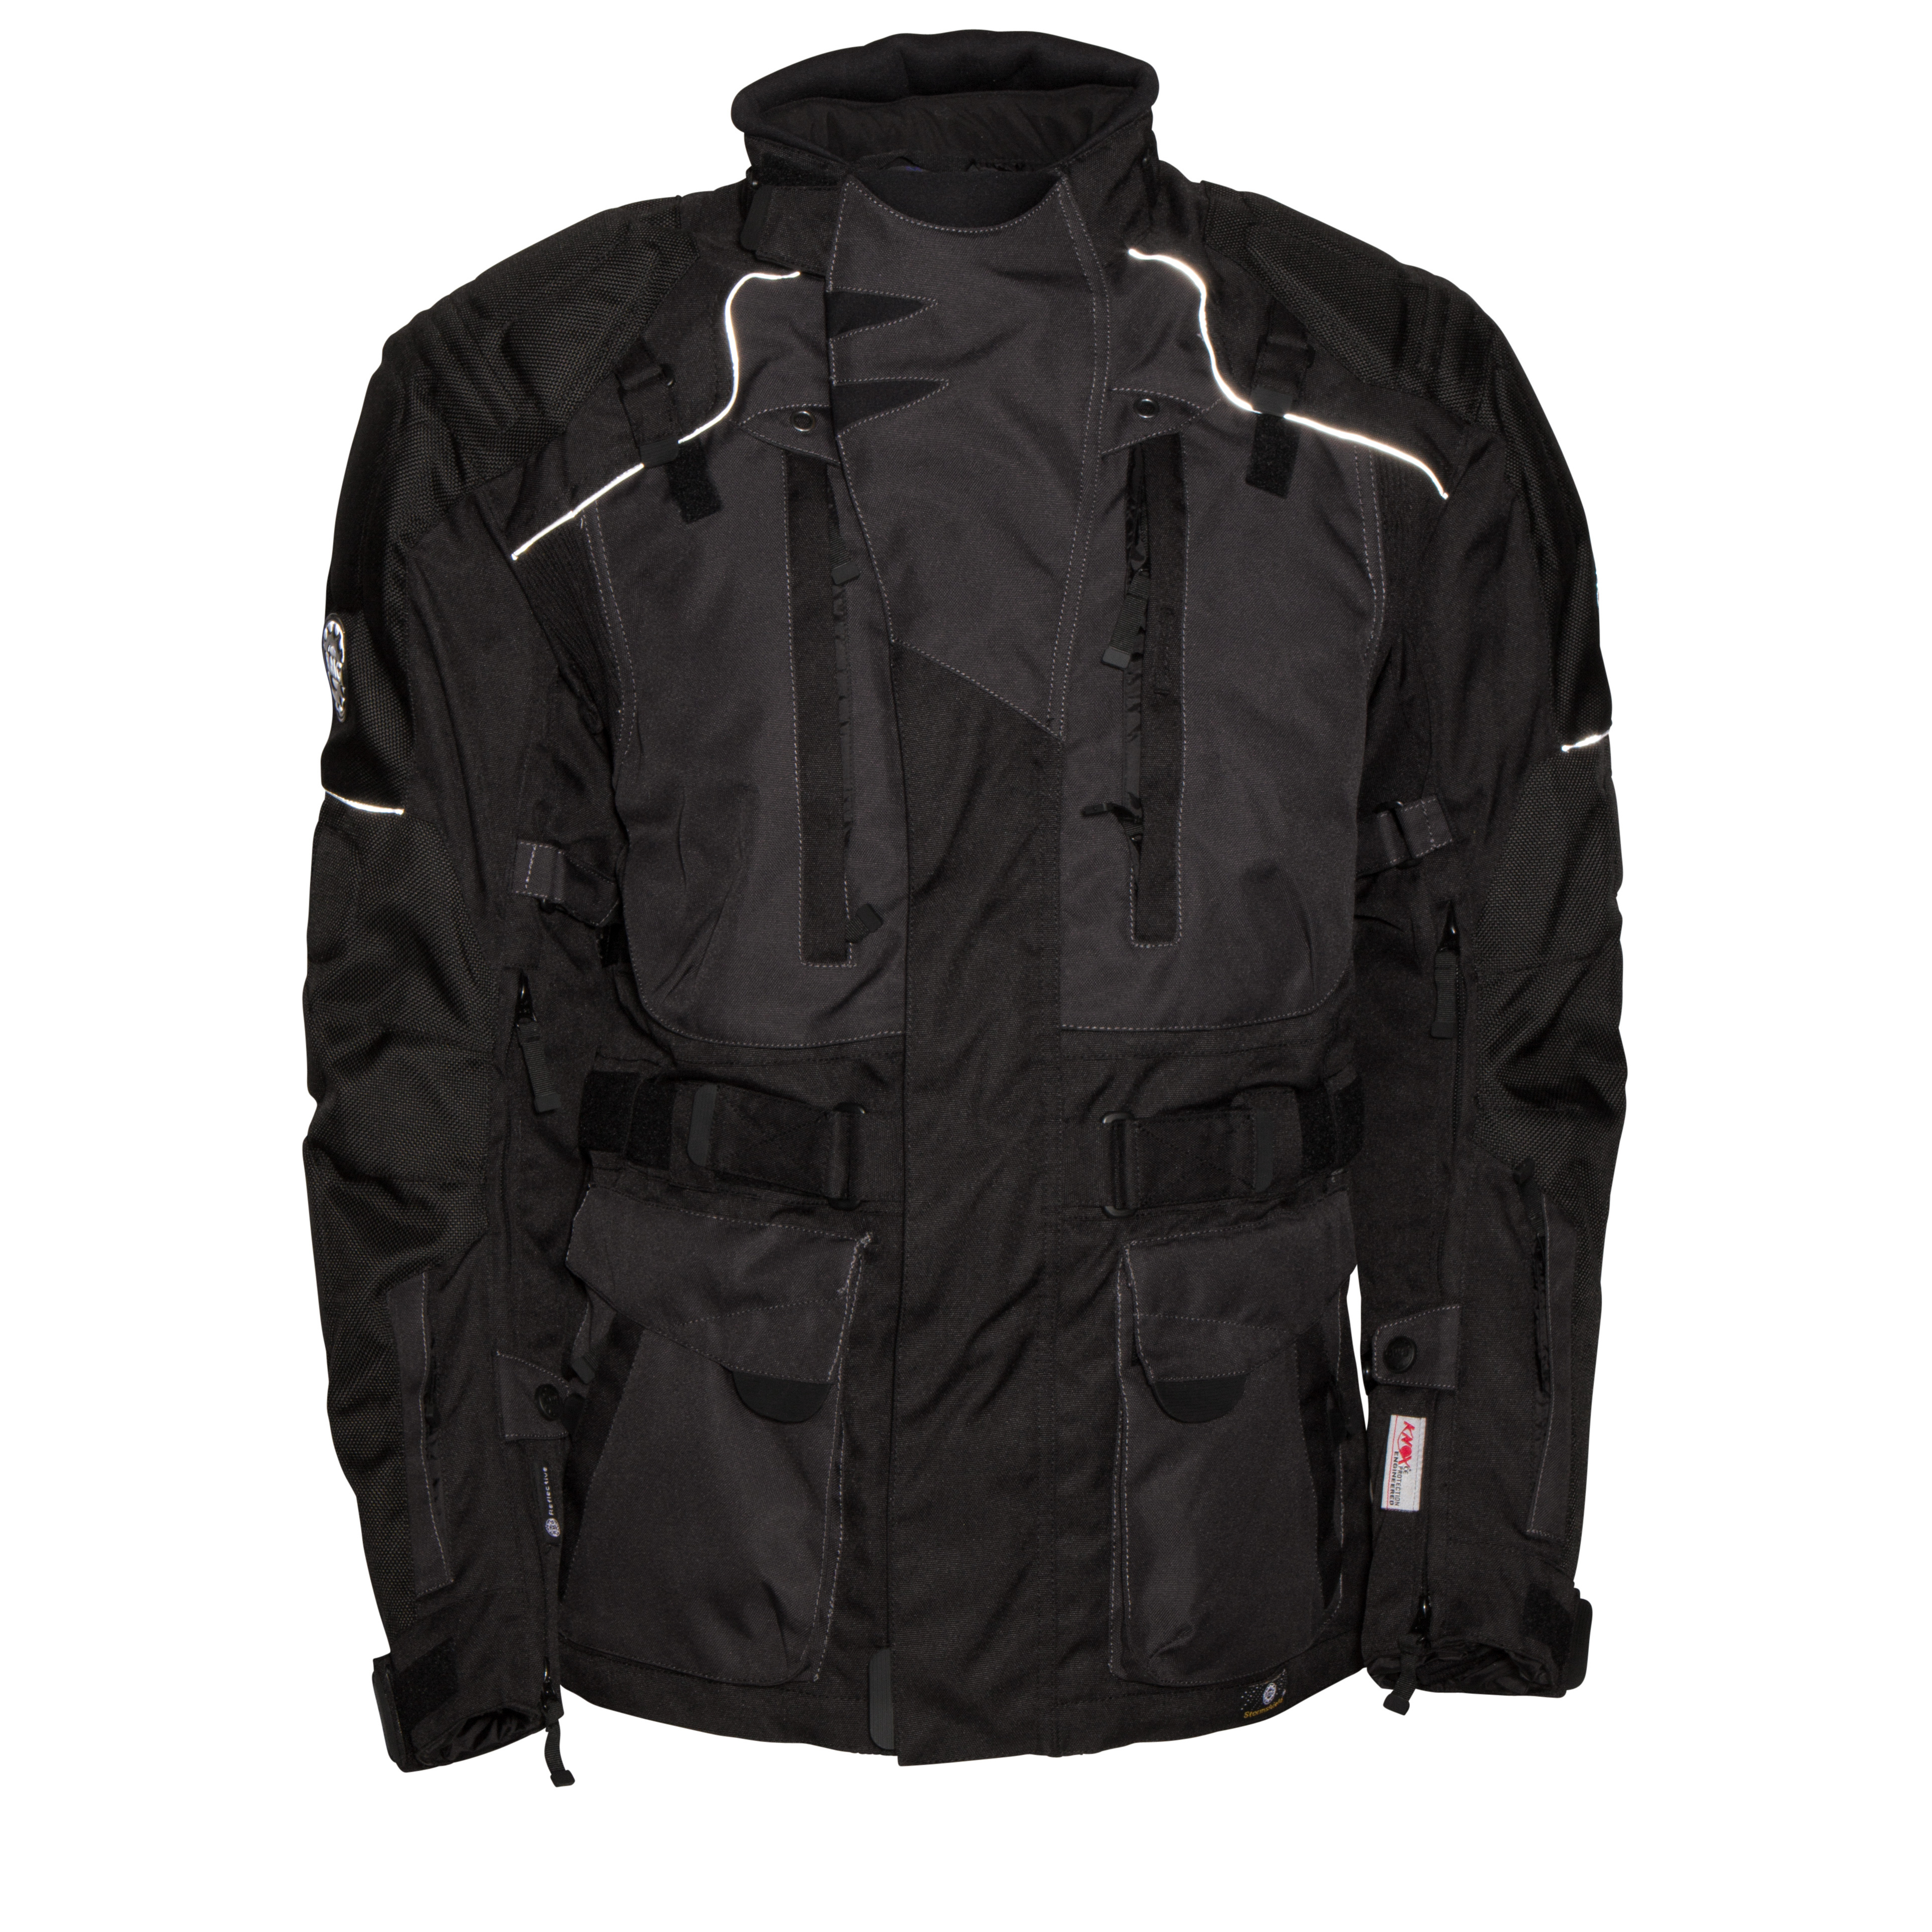 Touring and Commuter Motorcycle Jacket Waterproof & Armored with